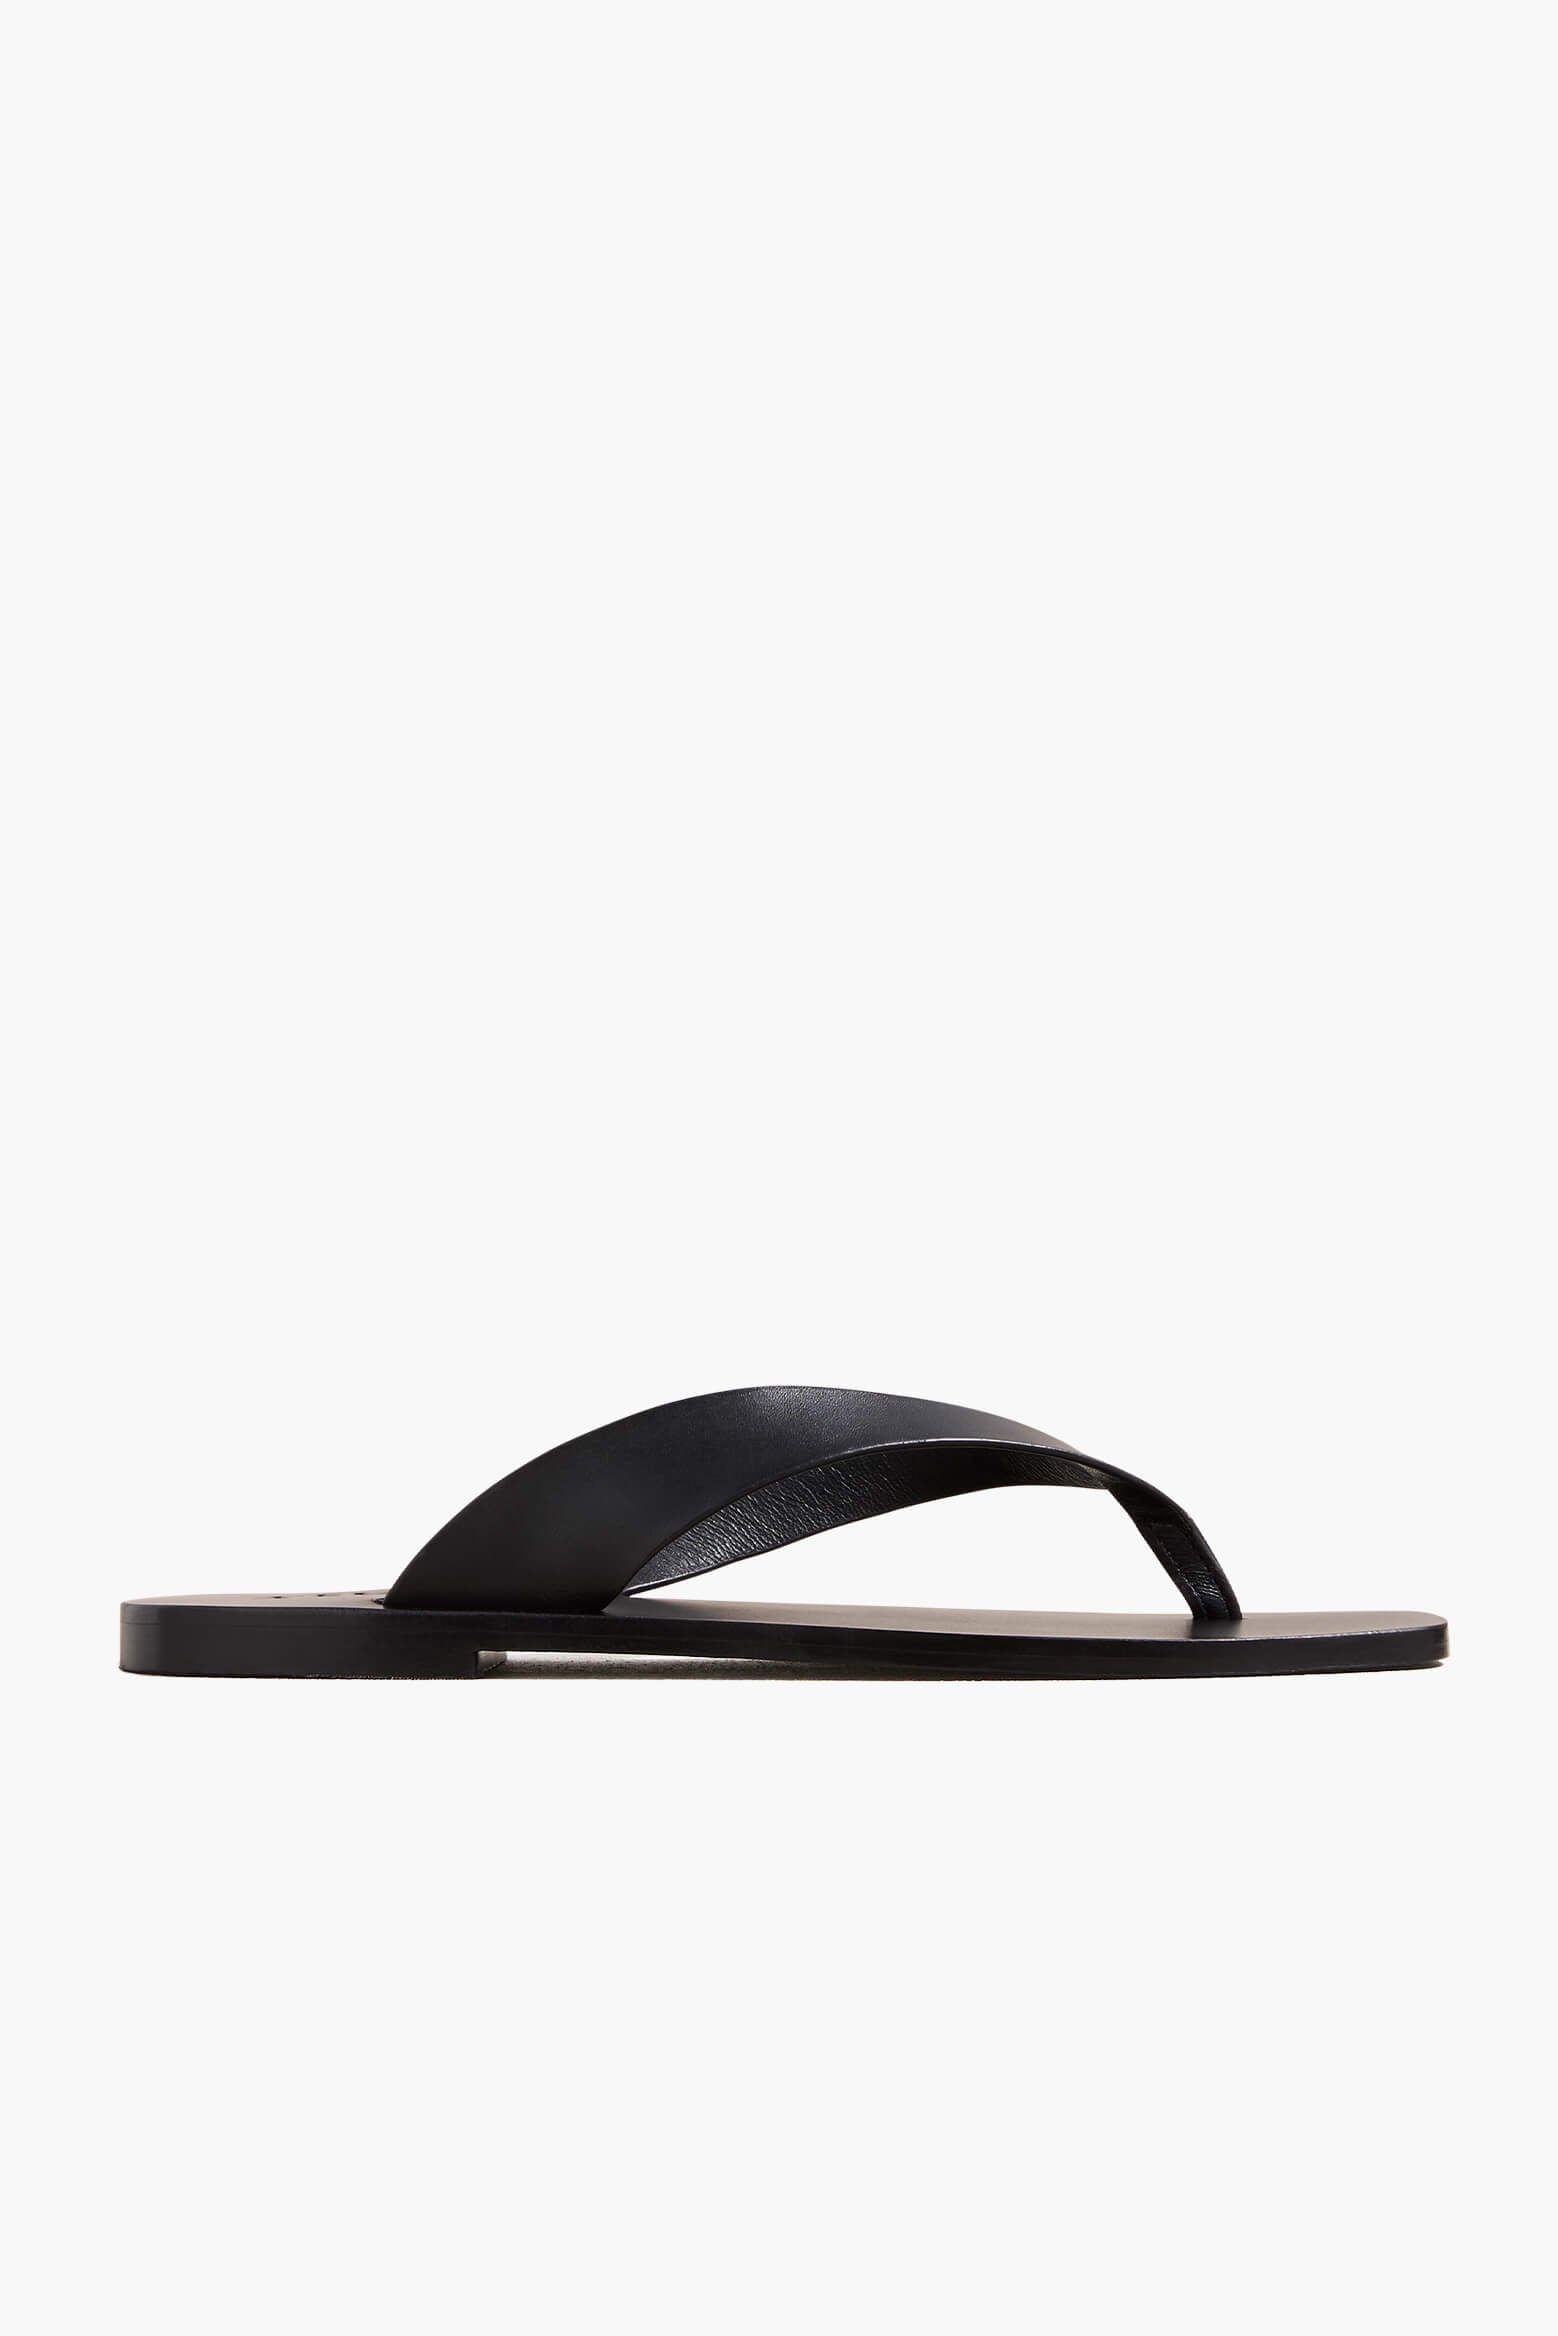 A.Emery Kinto Sandal in Black available at The New Trend Australia.